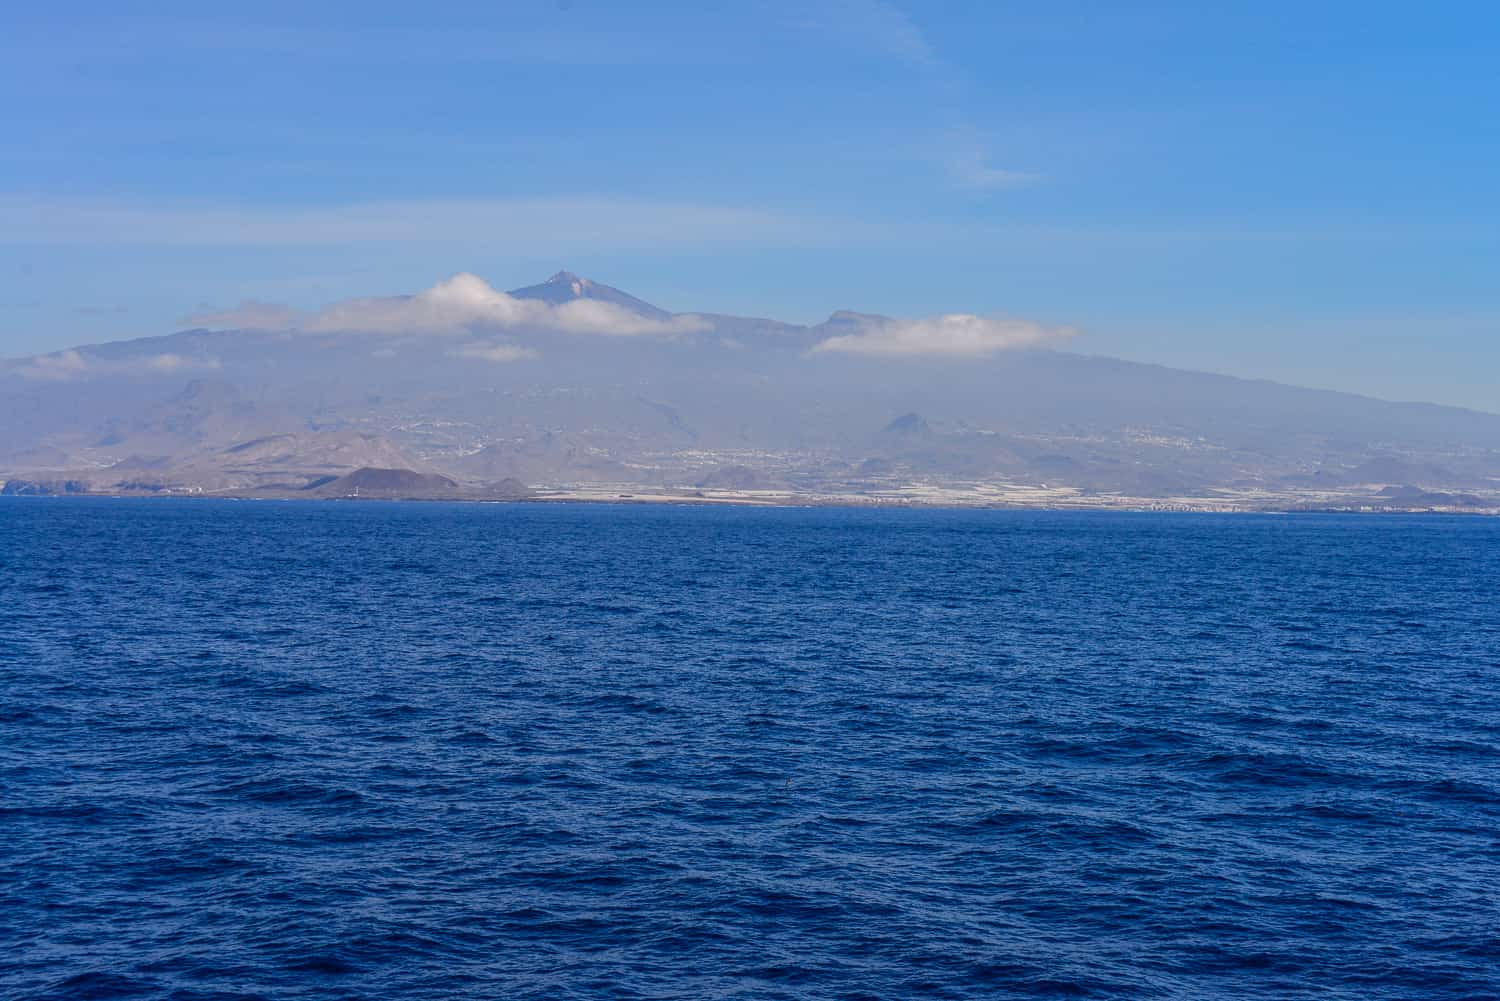 The island of Tenerife rises from the ocean.